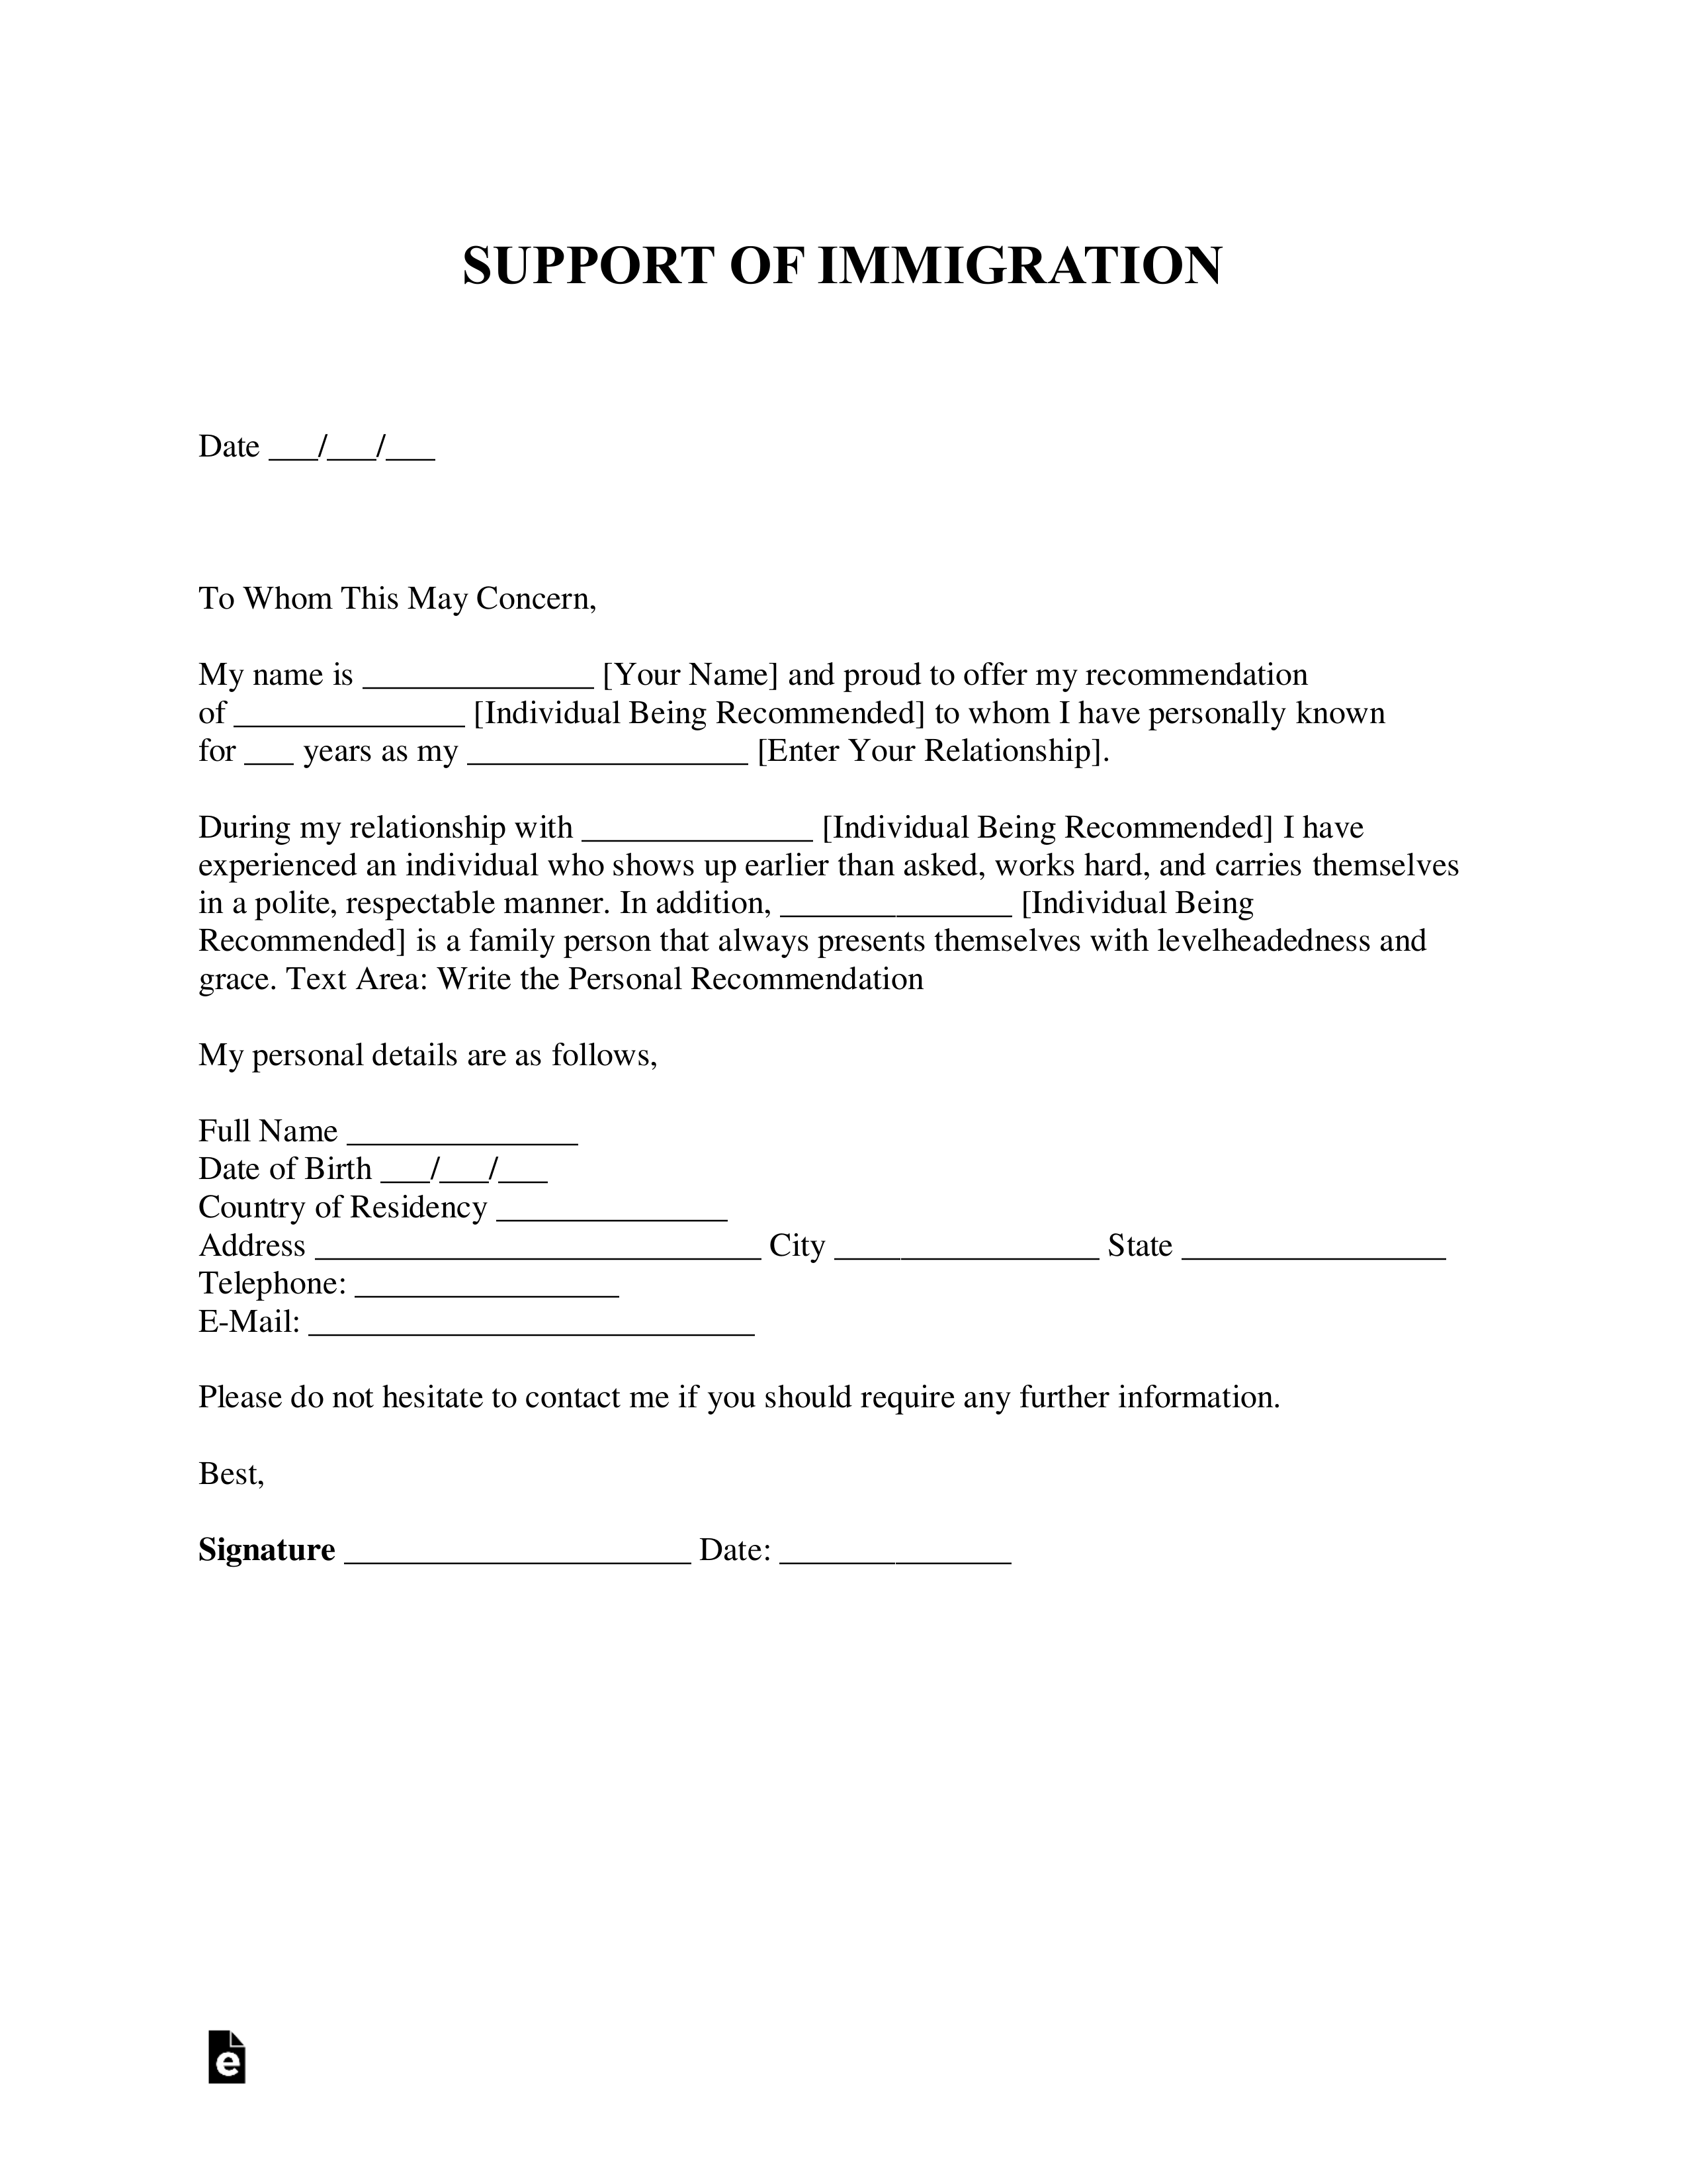 Recommendation Letter For Immigration Residency Sample from eforms.com